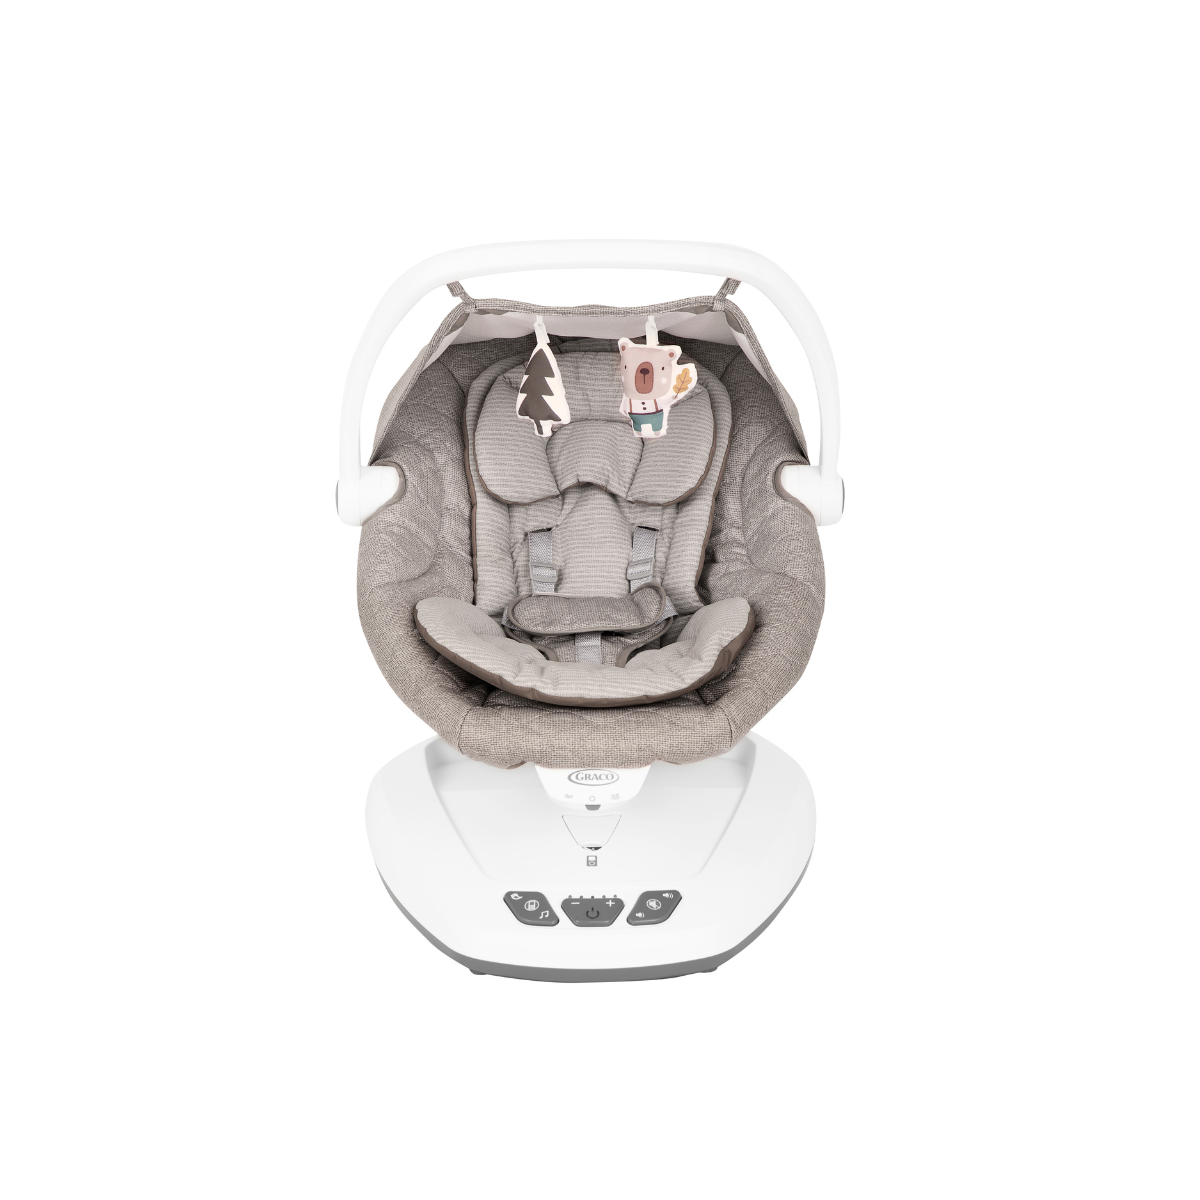 Swing Me | Compact Portable & Easily Move Graco With Baby